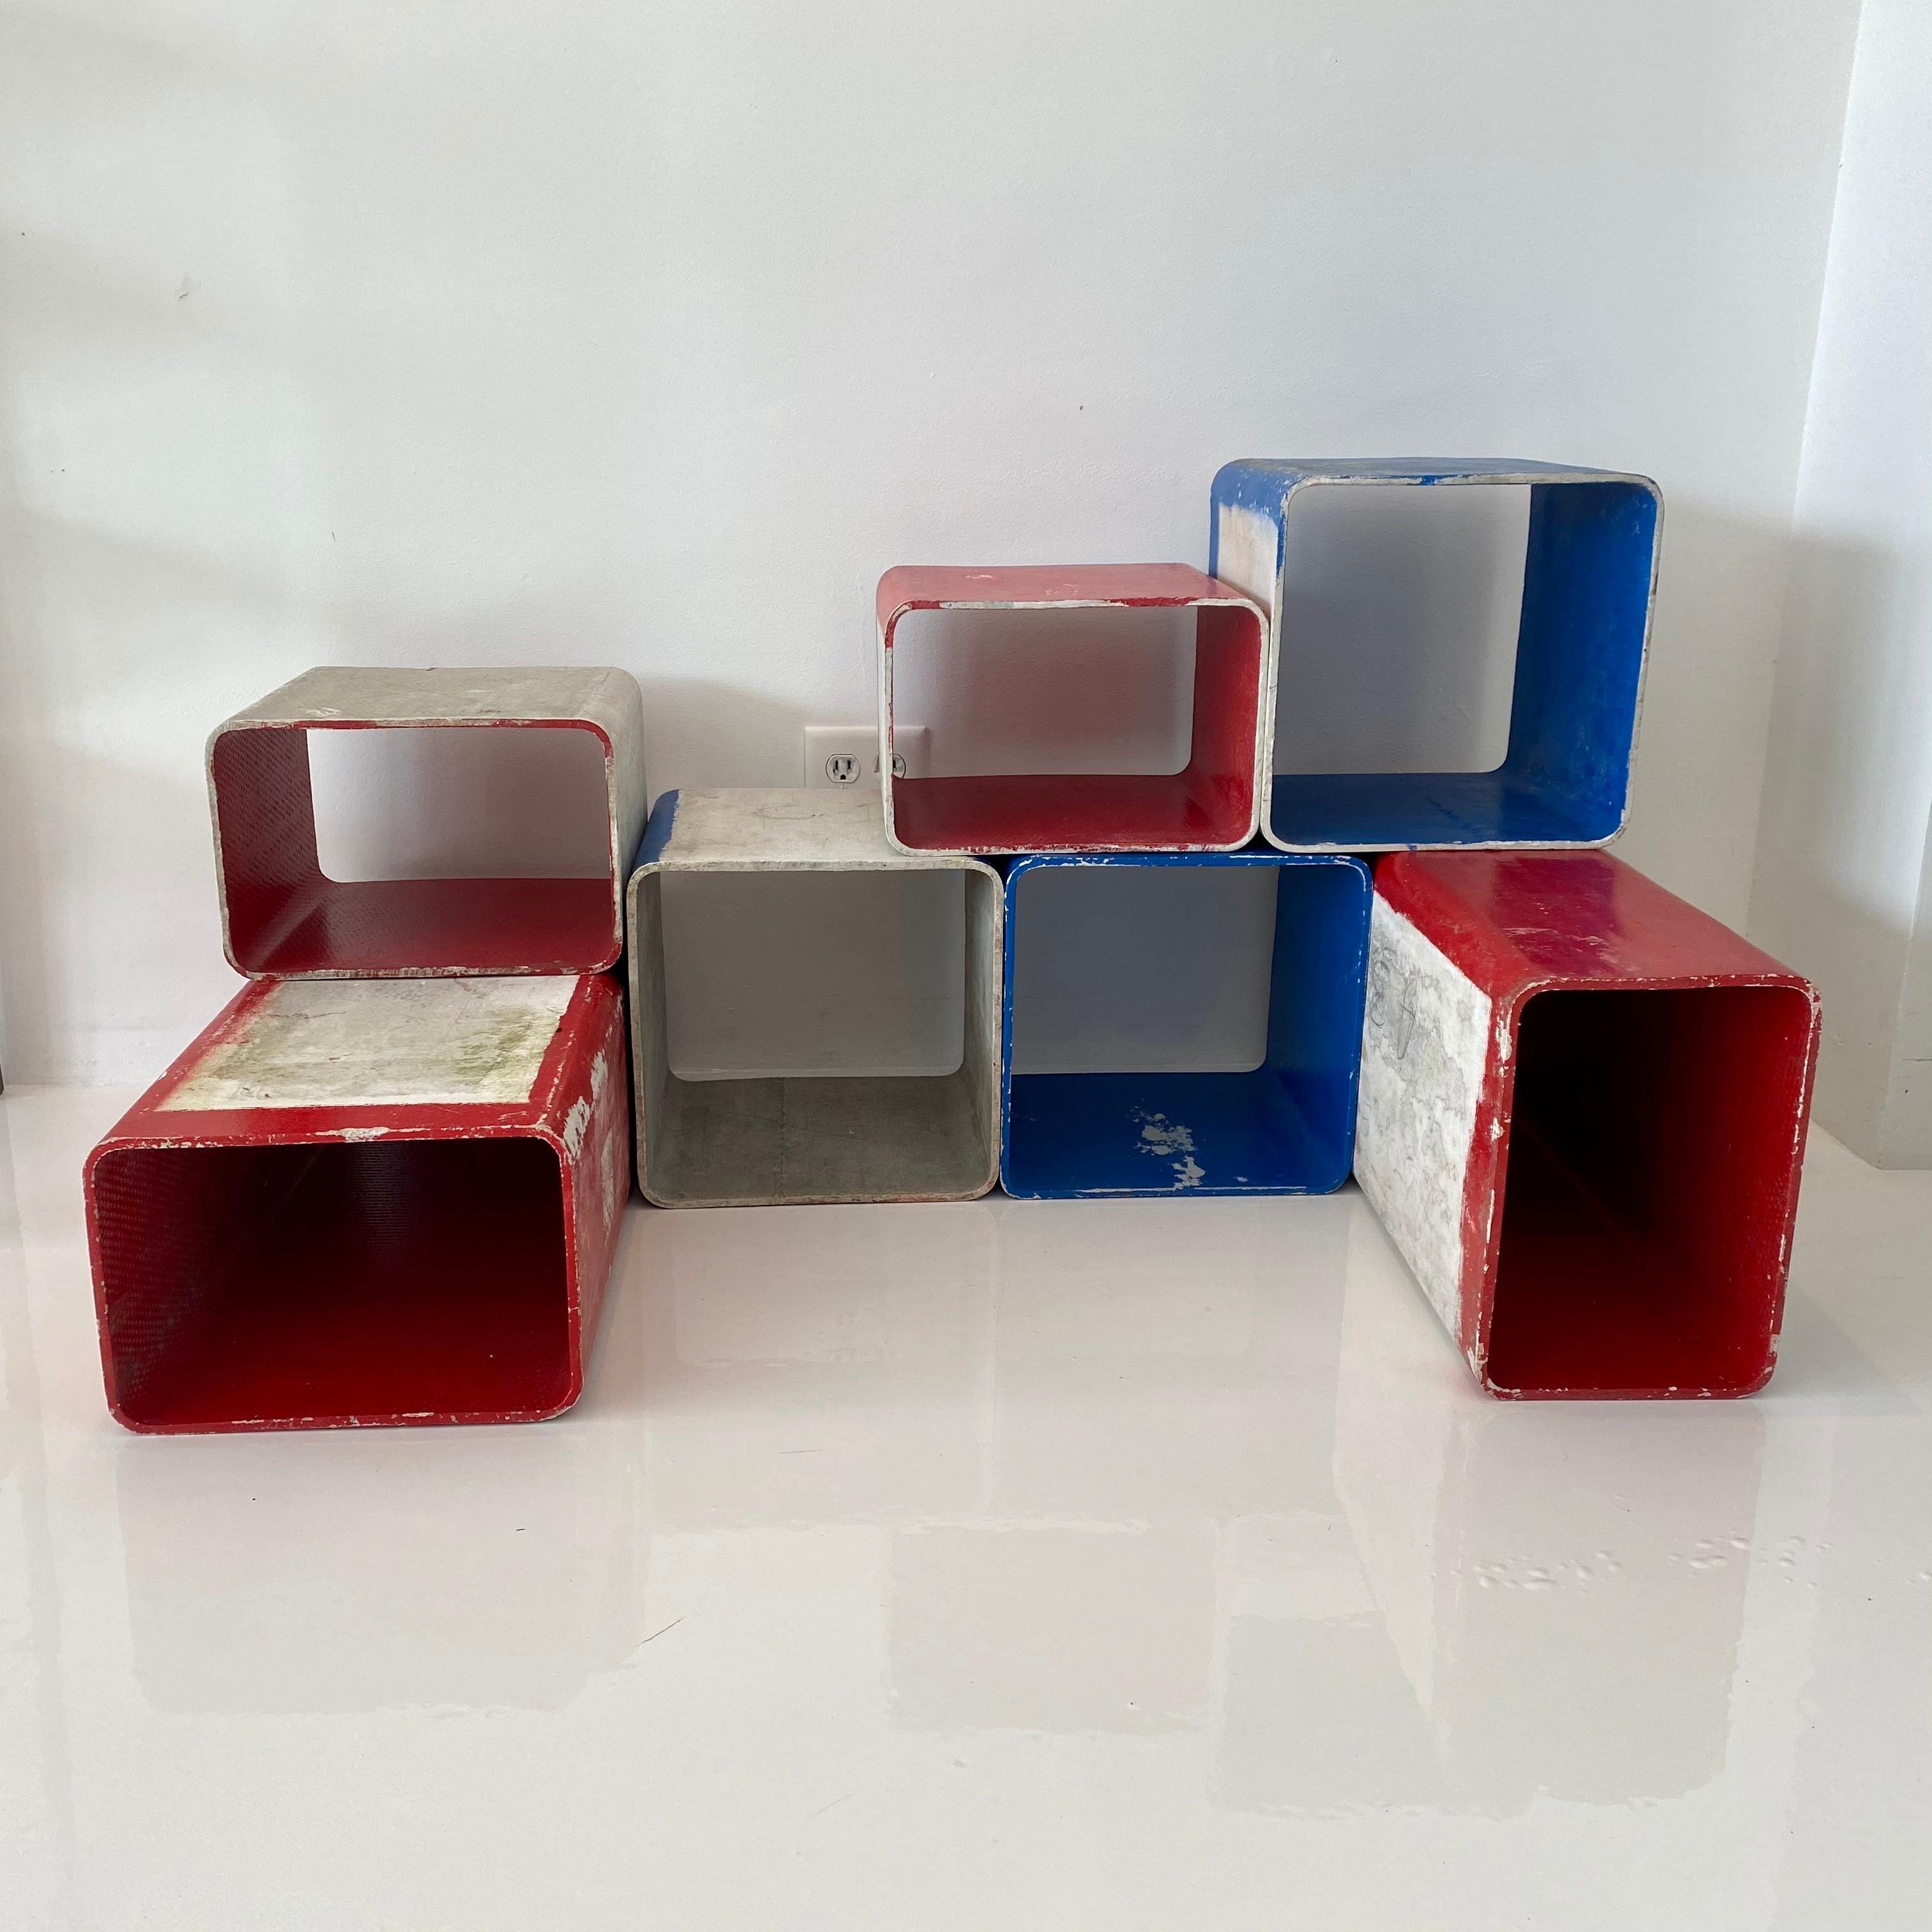 Unique set of painted red and blue concrete cubes by Swiss architect and designer Willy Guhl. handmade in the early 1960s in Switzerland. Produced by Eternit. Set of 7 cubes in great original condition. Can be arranged in a multitude of ways.